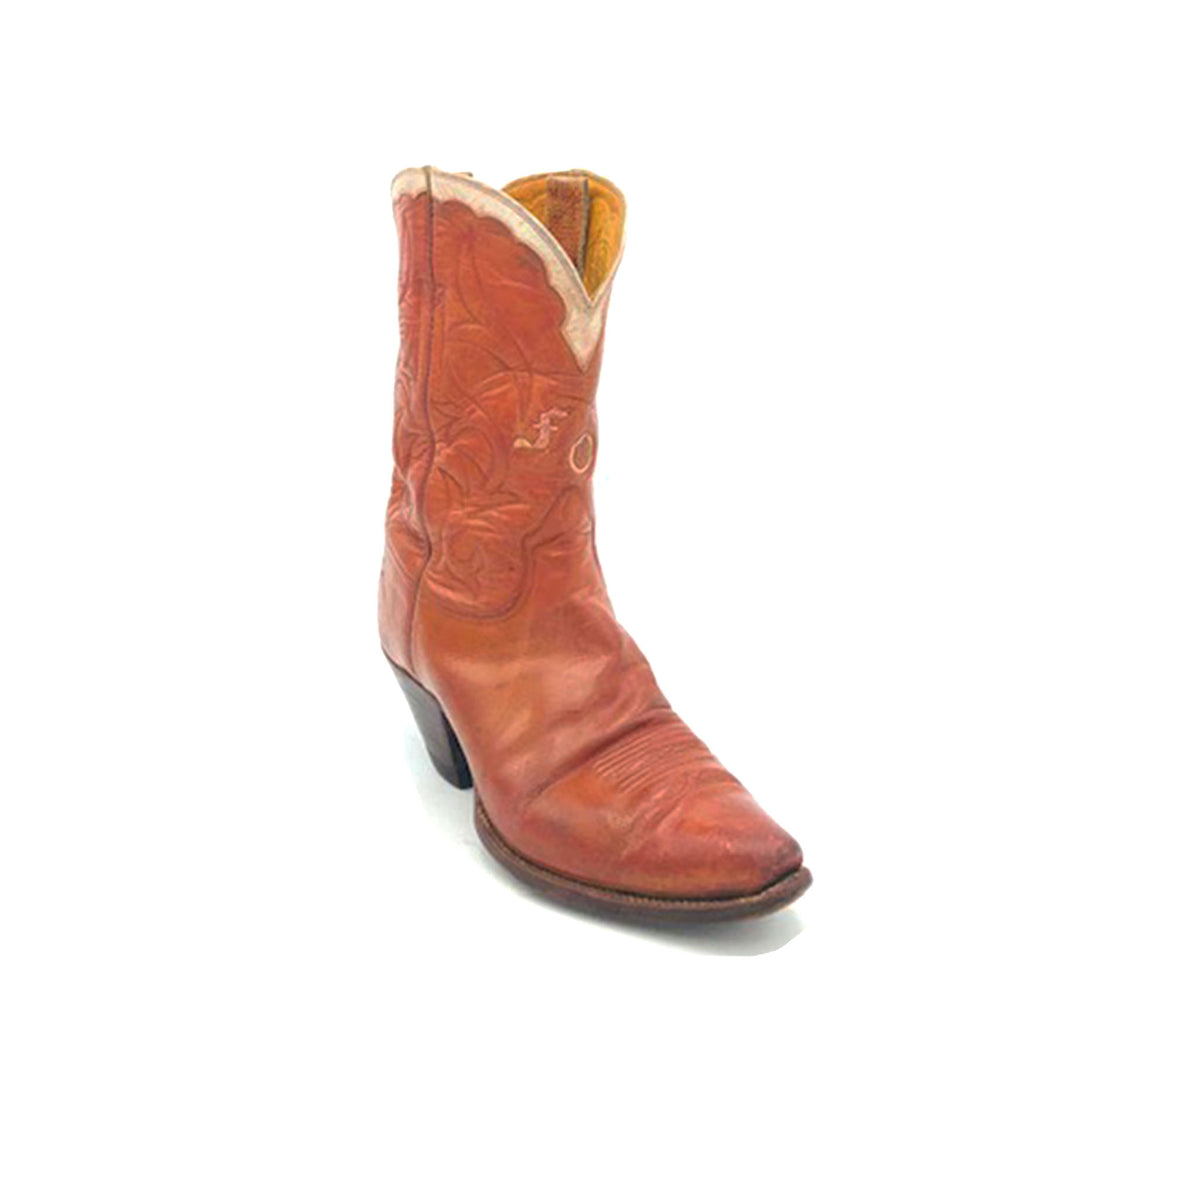 vintage lucchese women's boots